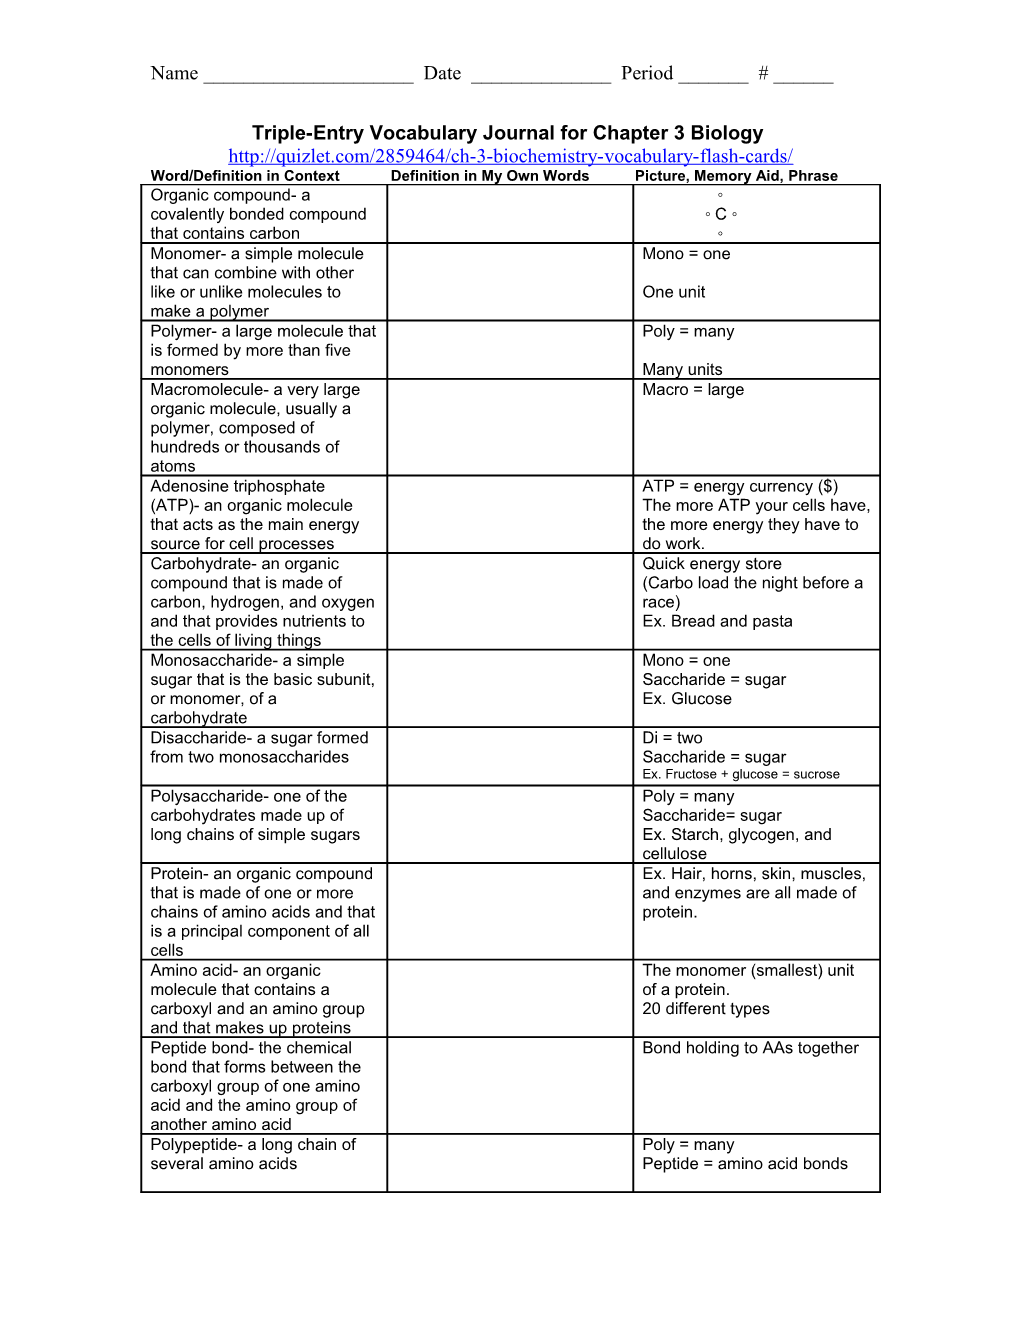 Triple-Entry Vocabulary Journal Template